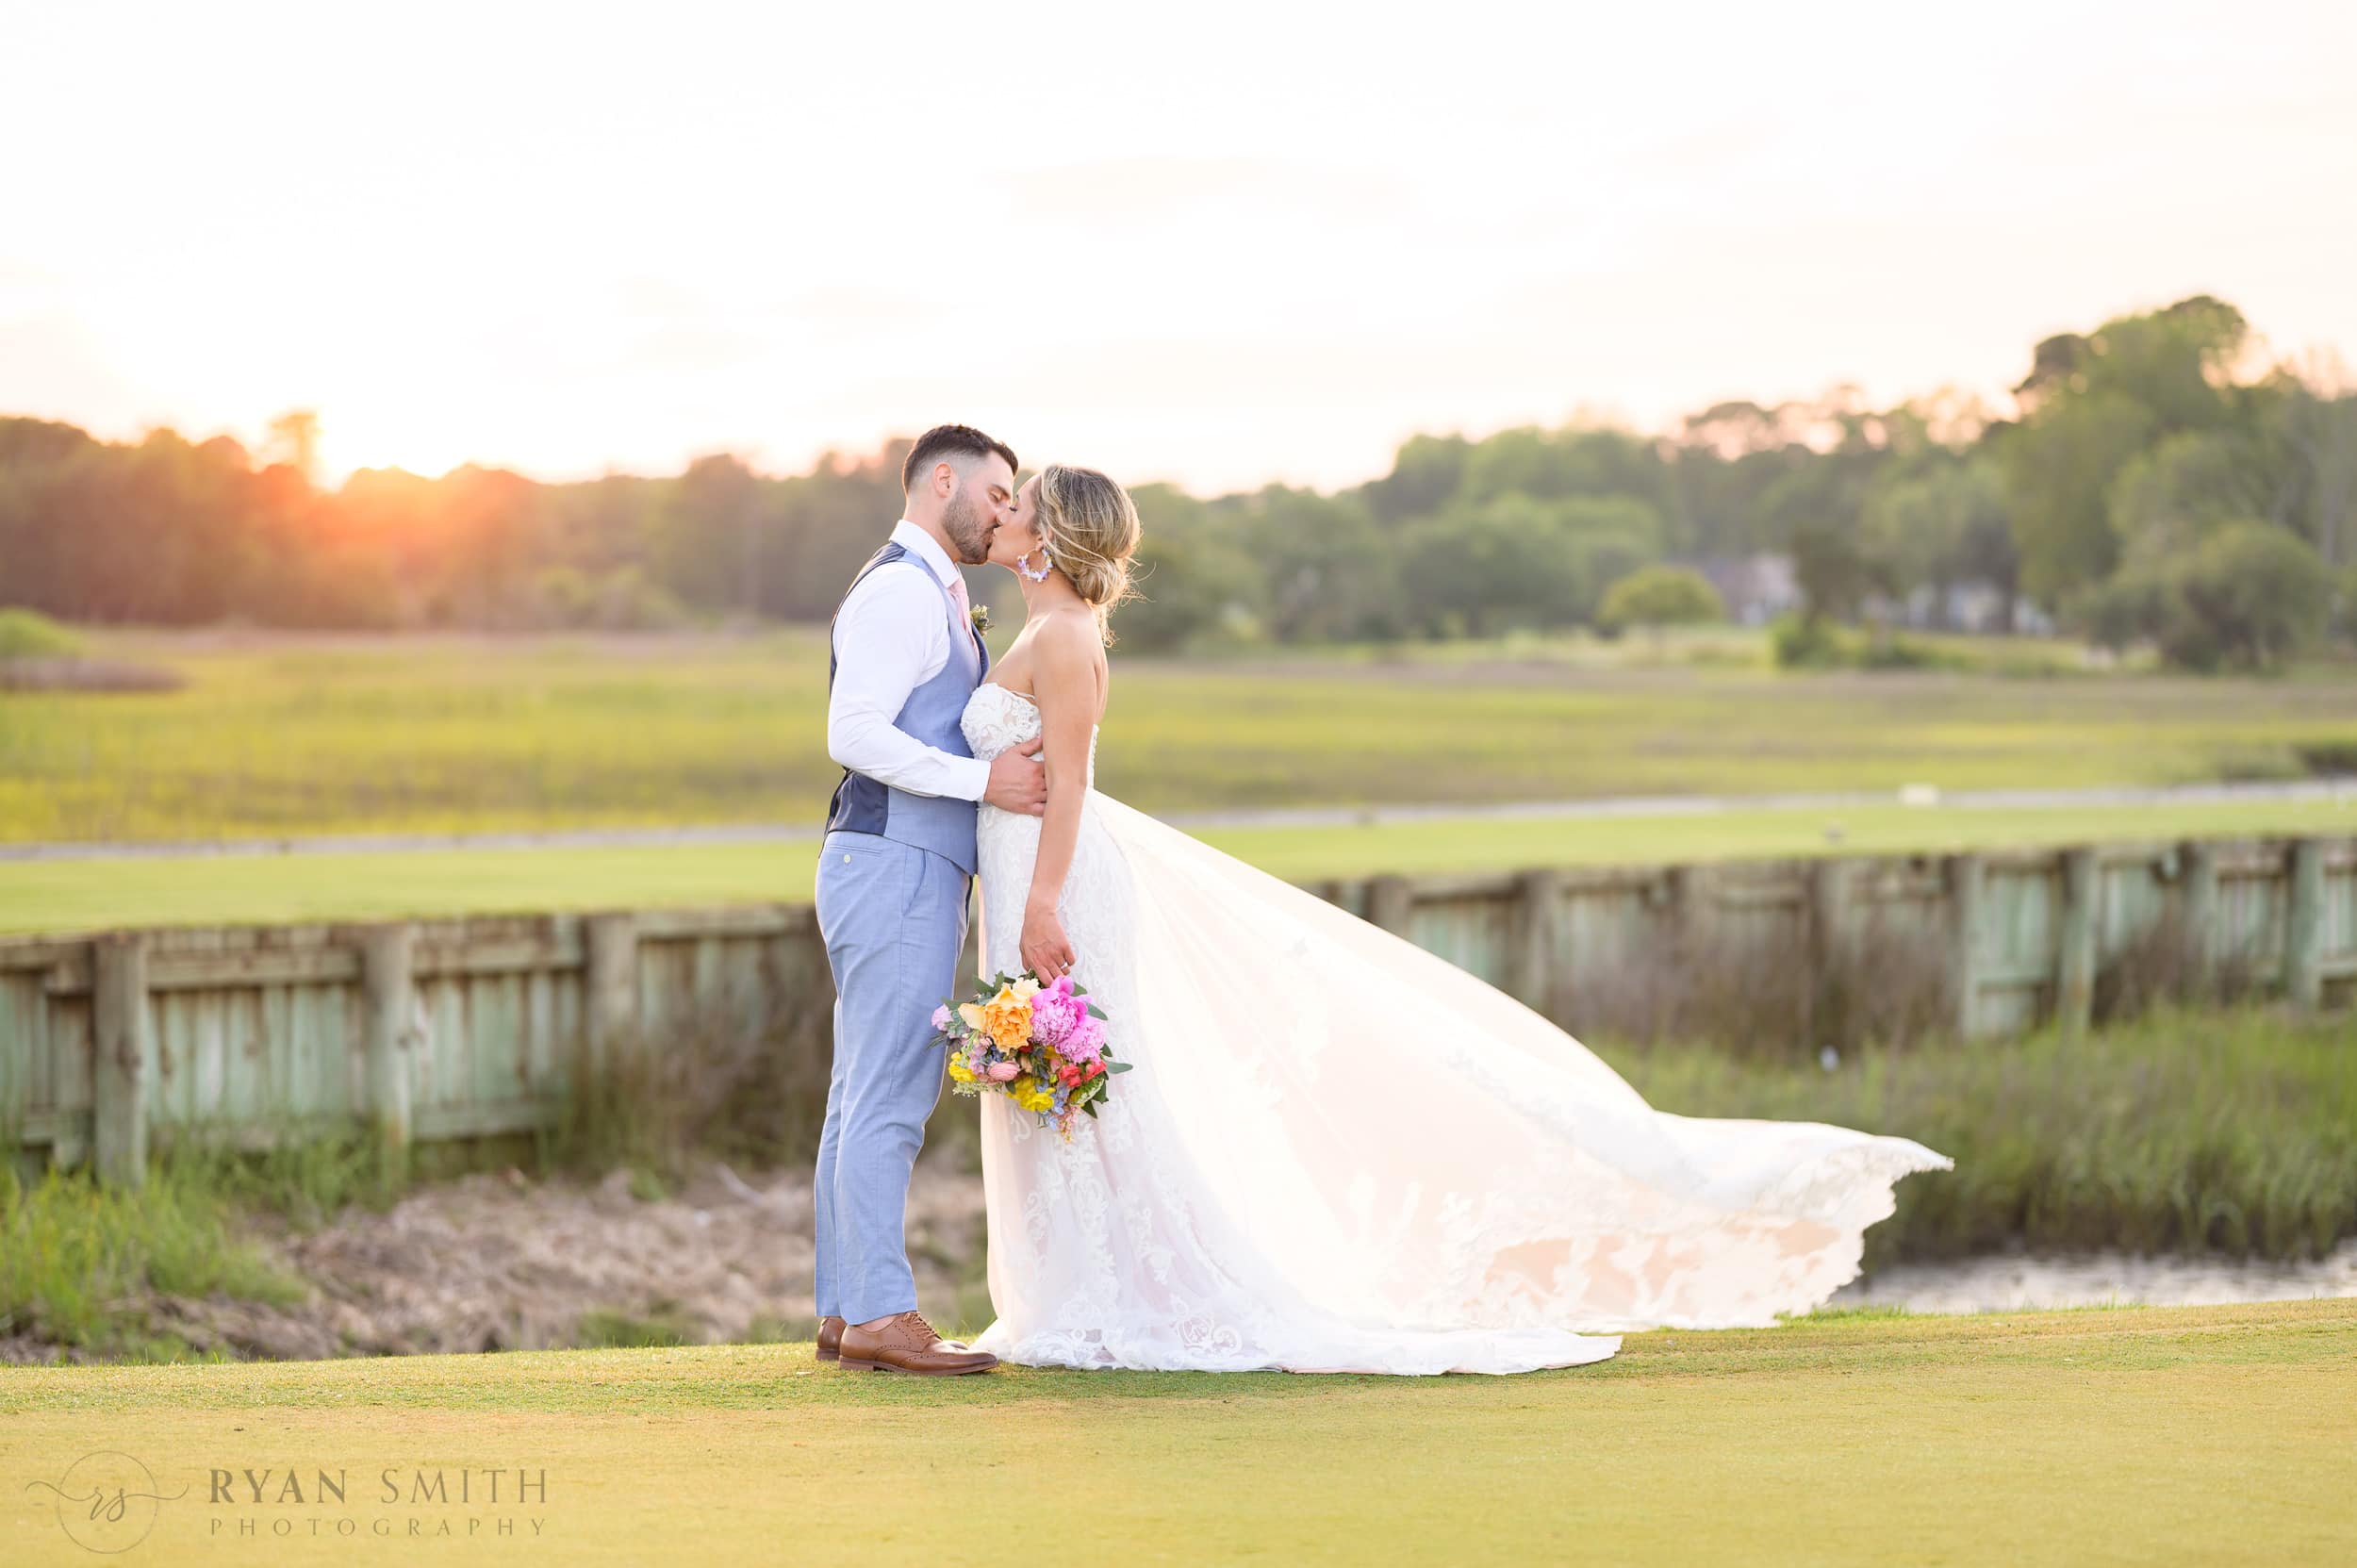 Pawleys Plantation wedding with beautiful flowers, a trolly, and a great sunset on the golf course